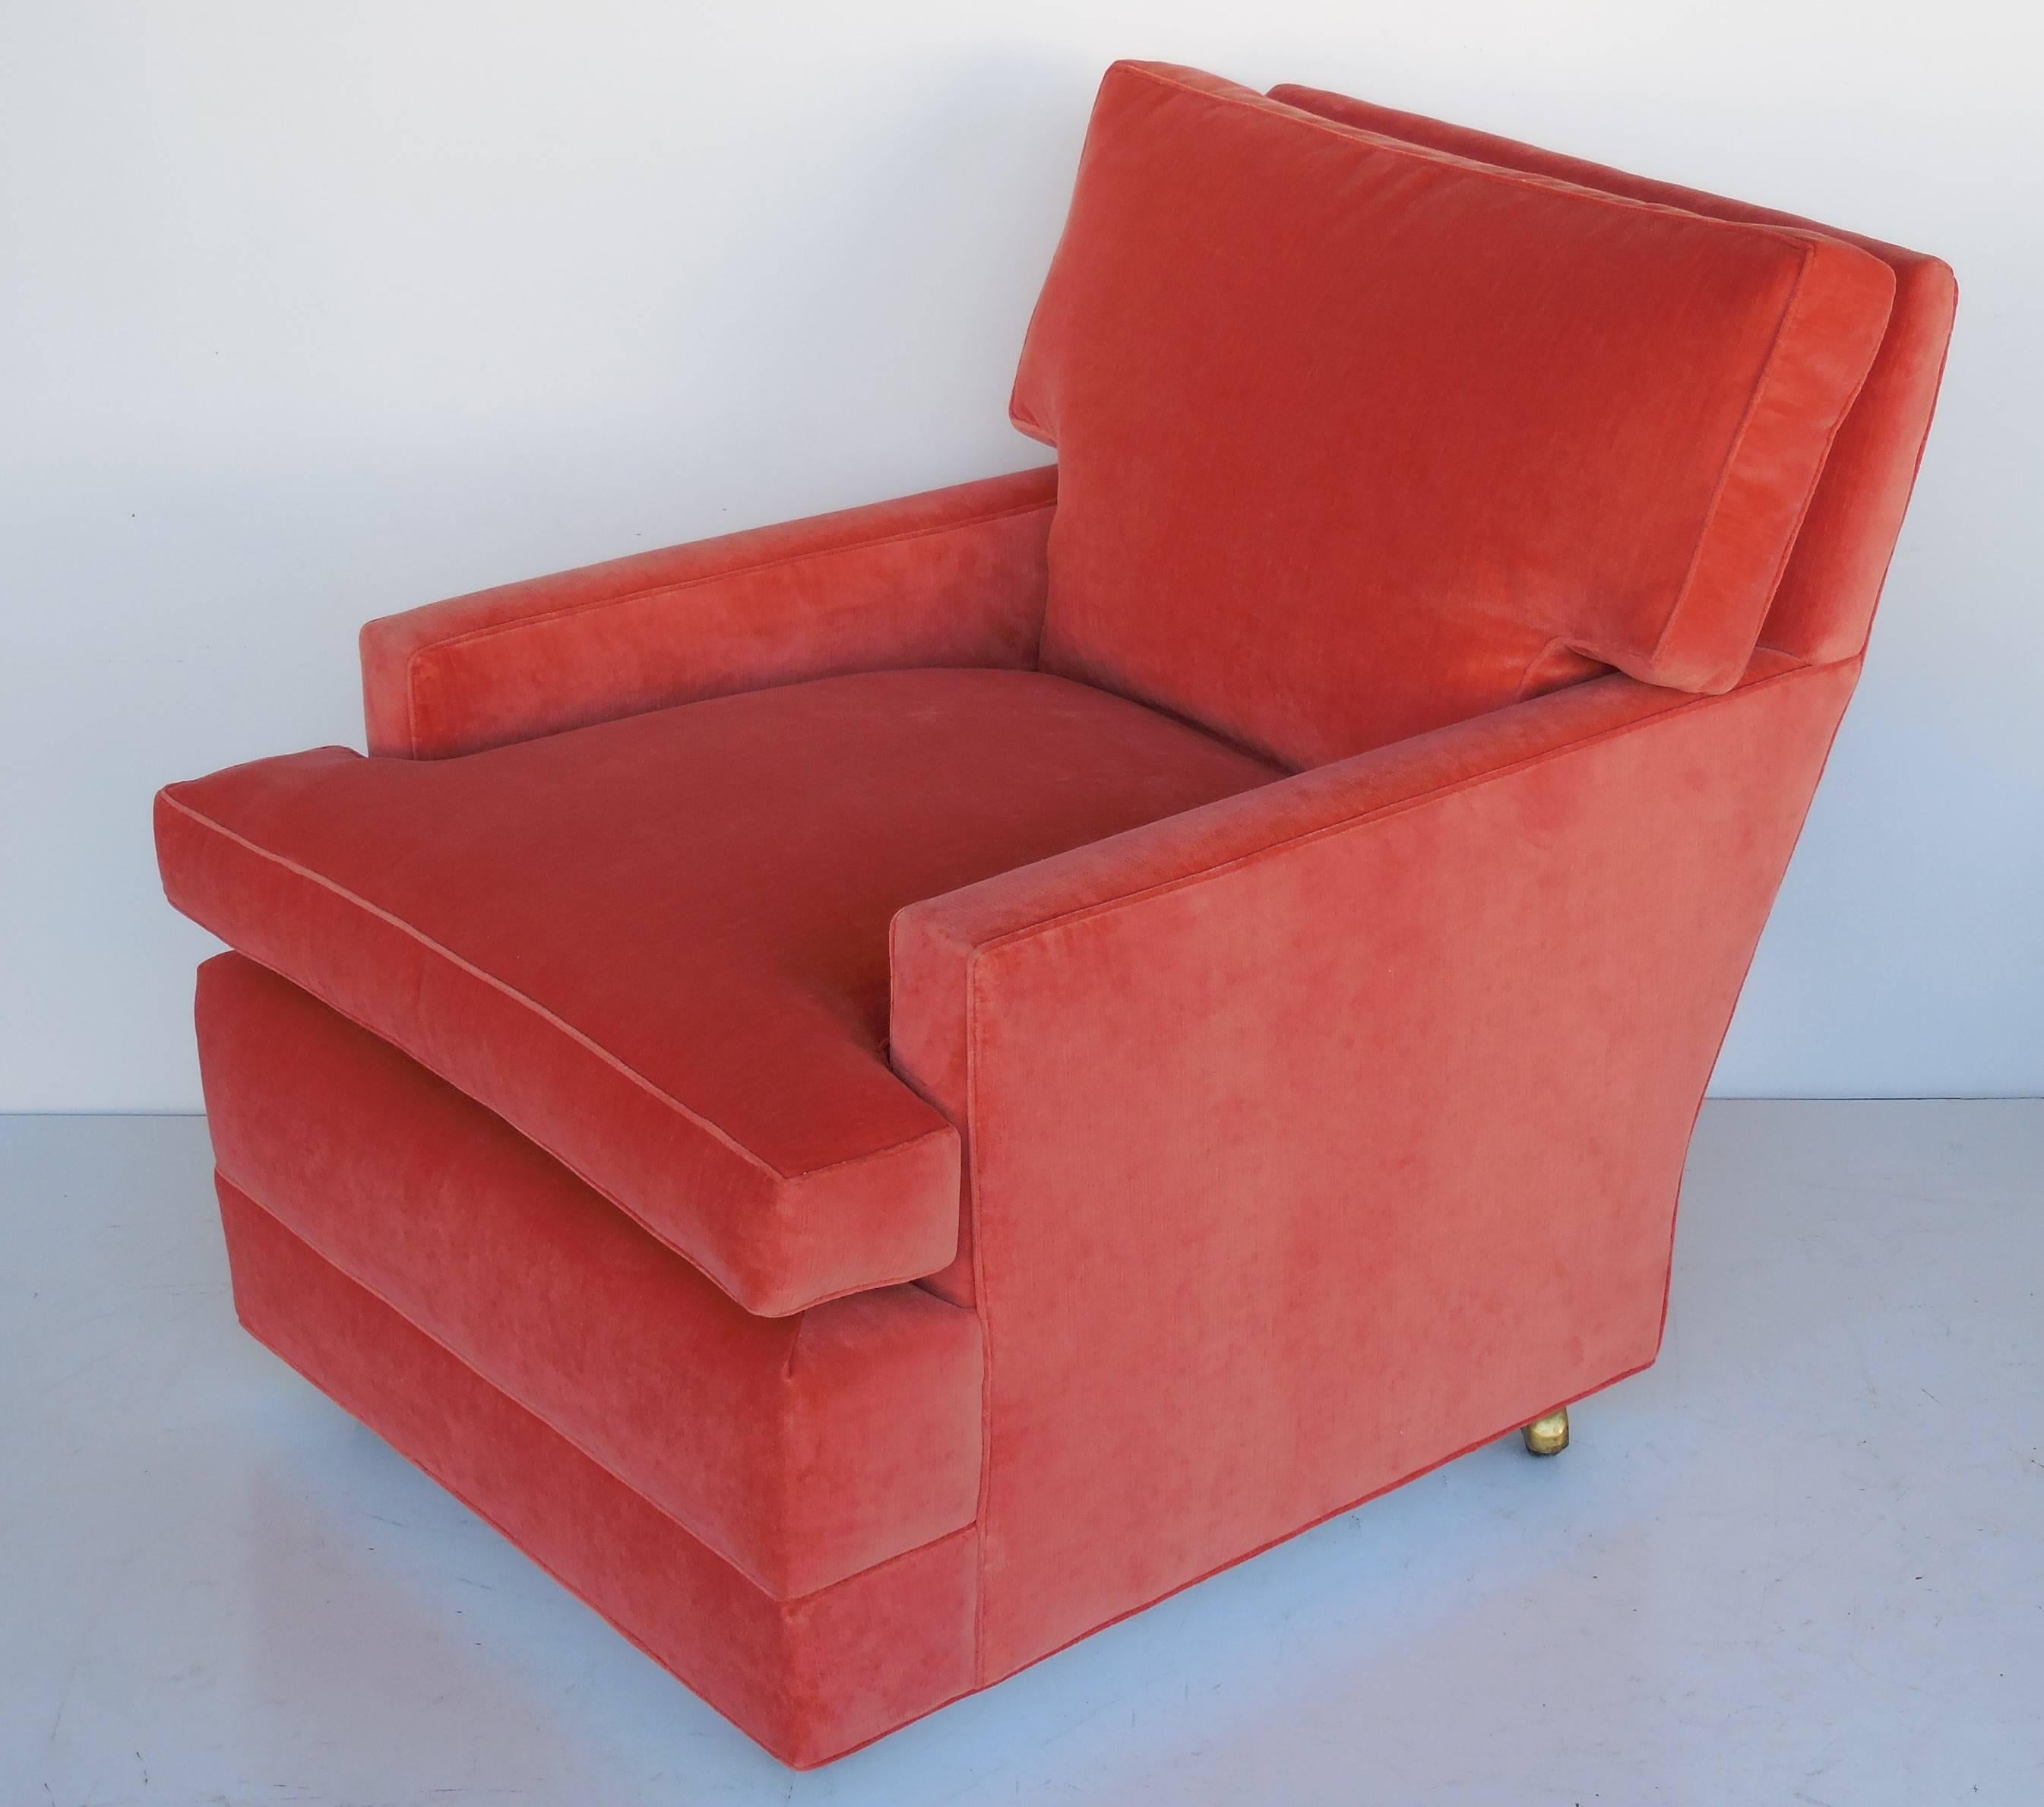 A pair of lounge chairs on casters, in the style of designs by Paul Frankl. Redone in tangerine velvet.